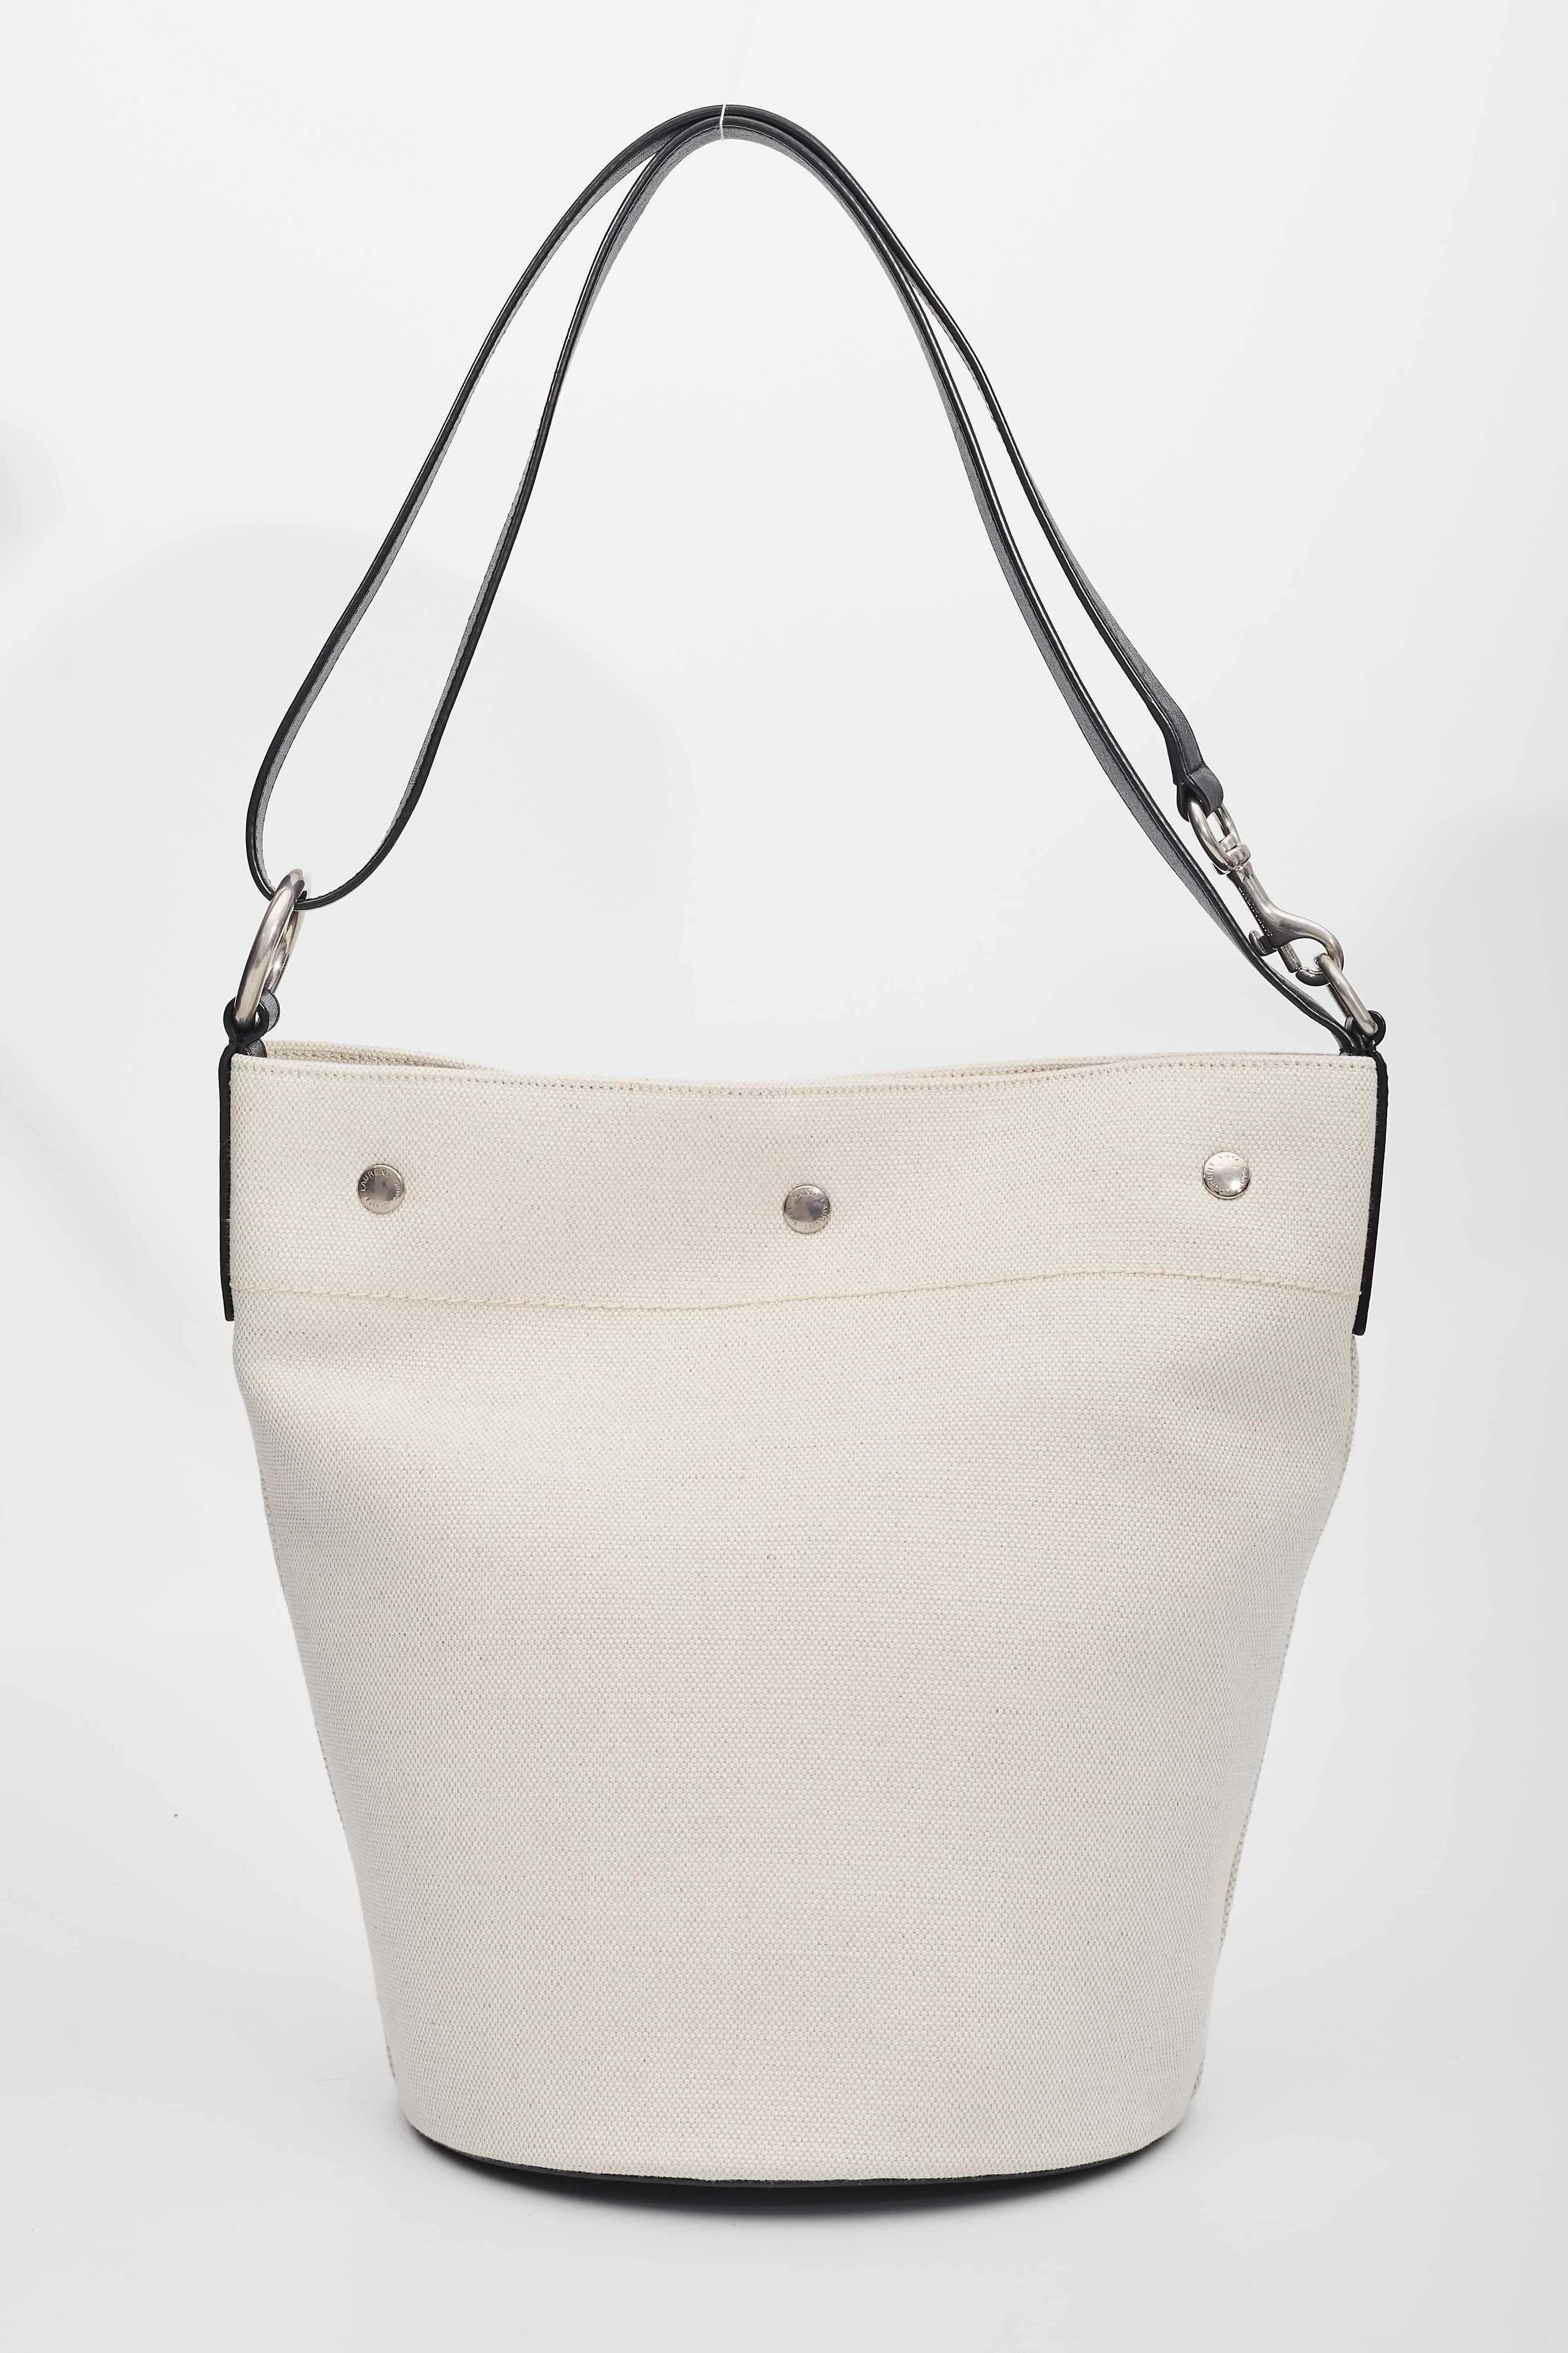 This bucket bag is made of crisp linen and edged with rich leather trim. It is embroidered with logo detail across the front and its interior has one main compartment with a removable zippered pouch. Featuring leather trim and snap button